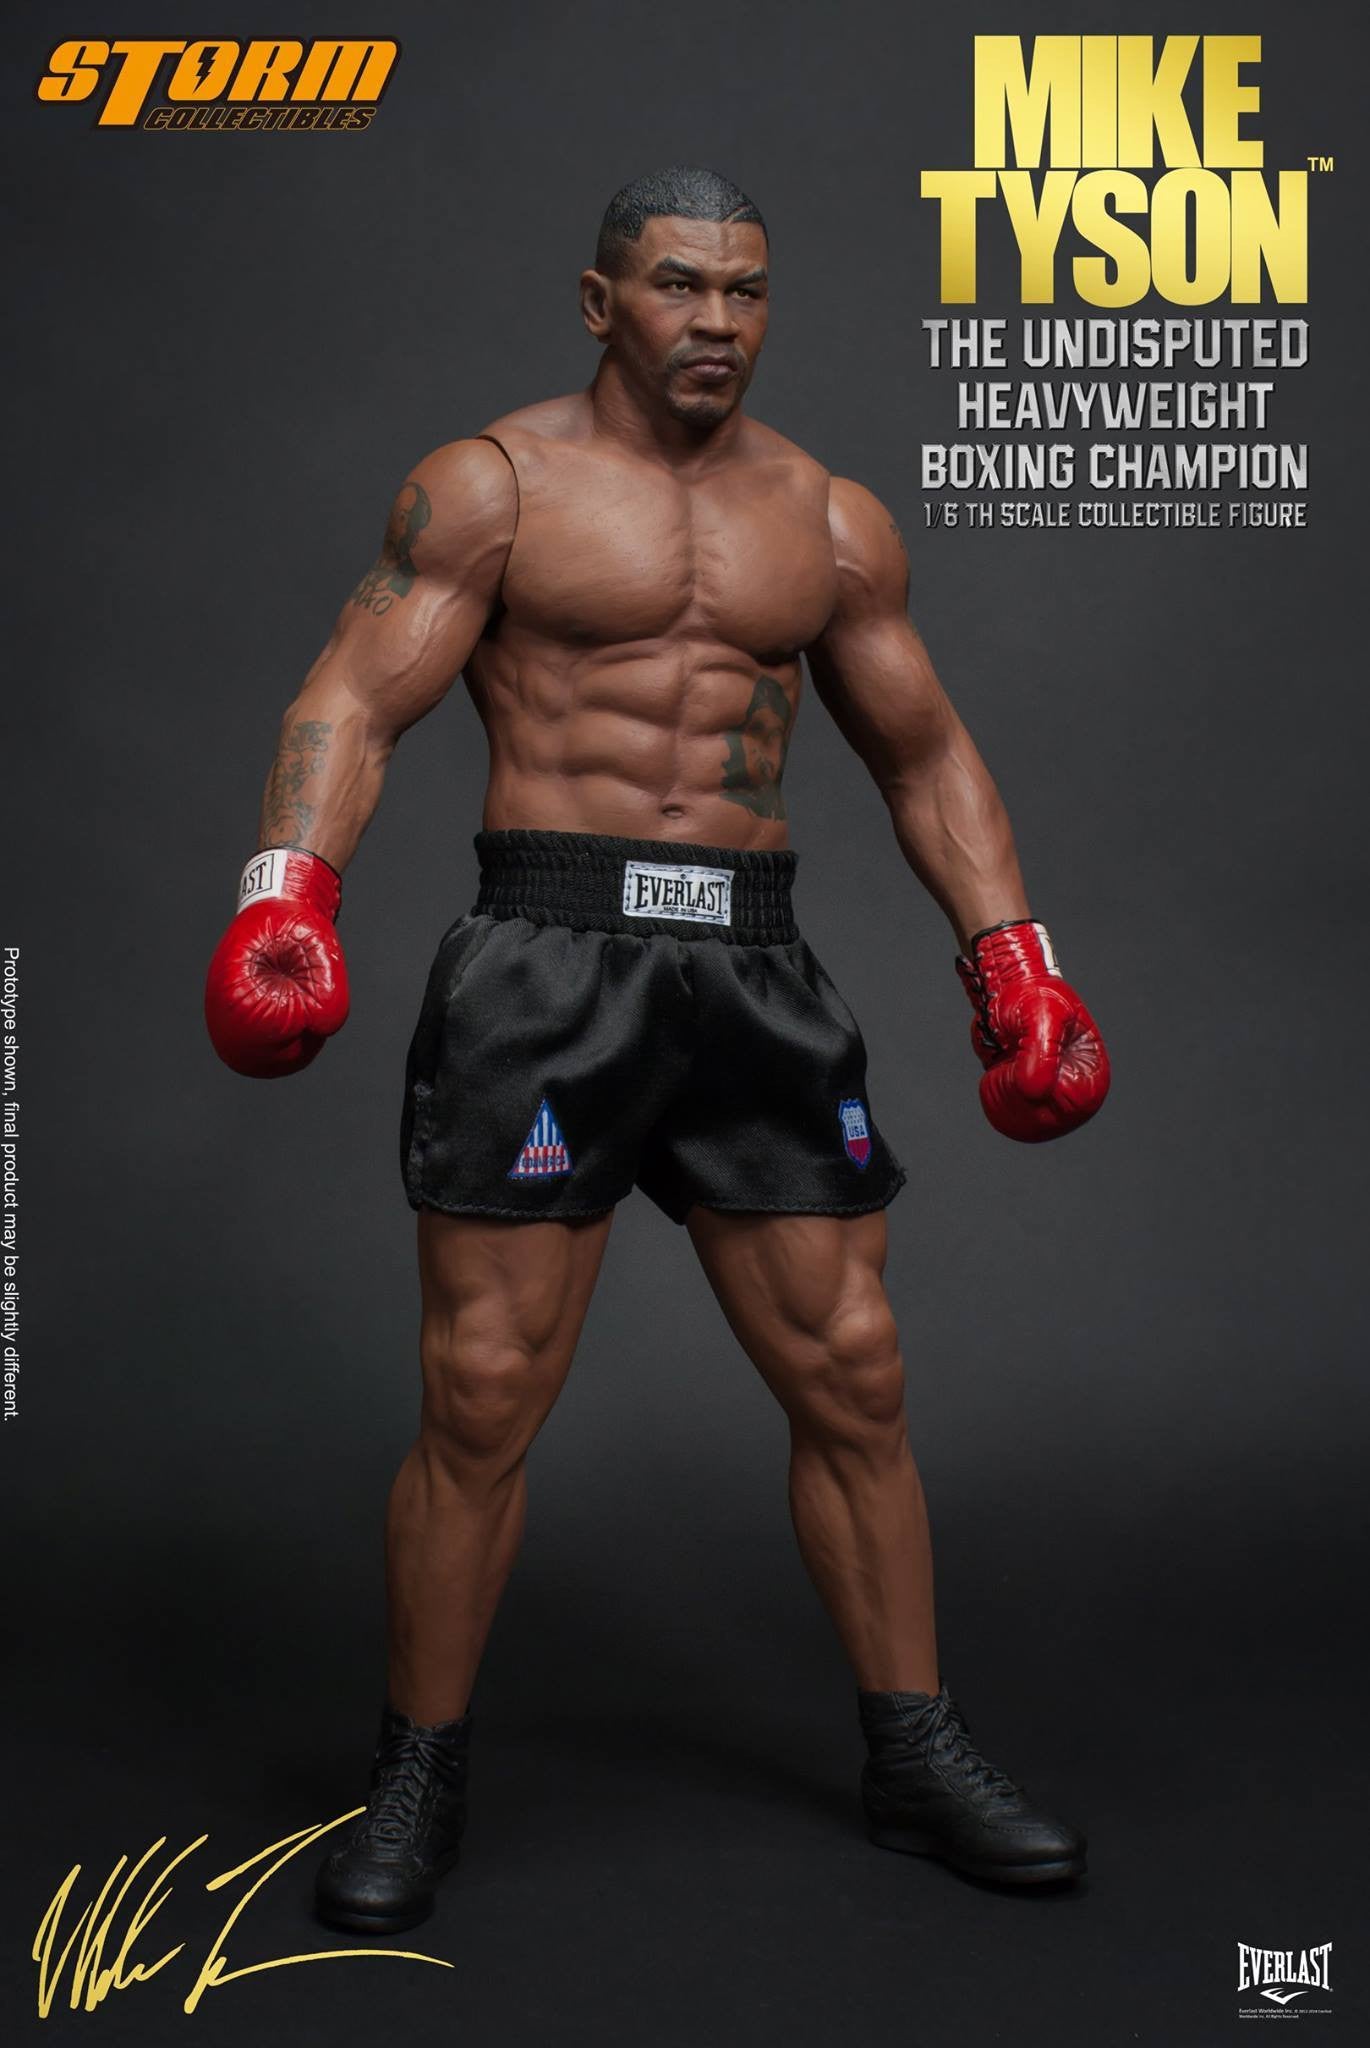 Storm Collectibles - 1:6 Scale Collectible Figure - Mike Tyson "The Undisputed Heavyweight Boxing Champion" - Marvelous Toys - 13